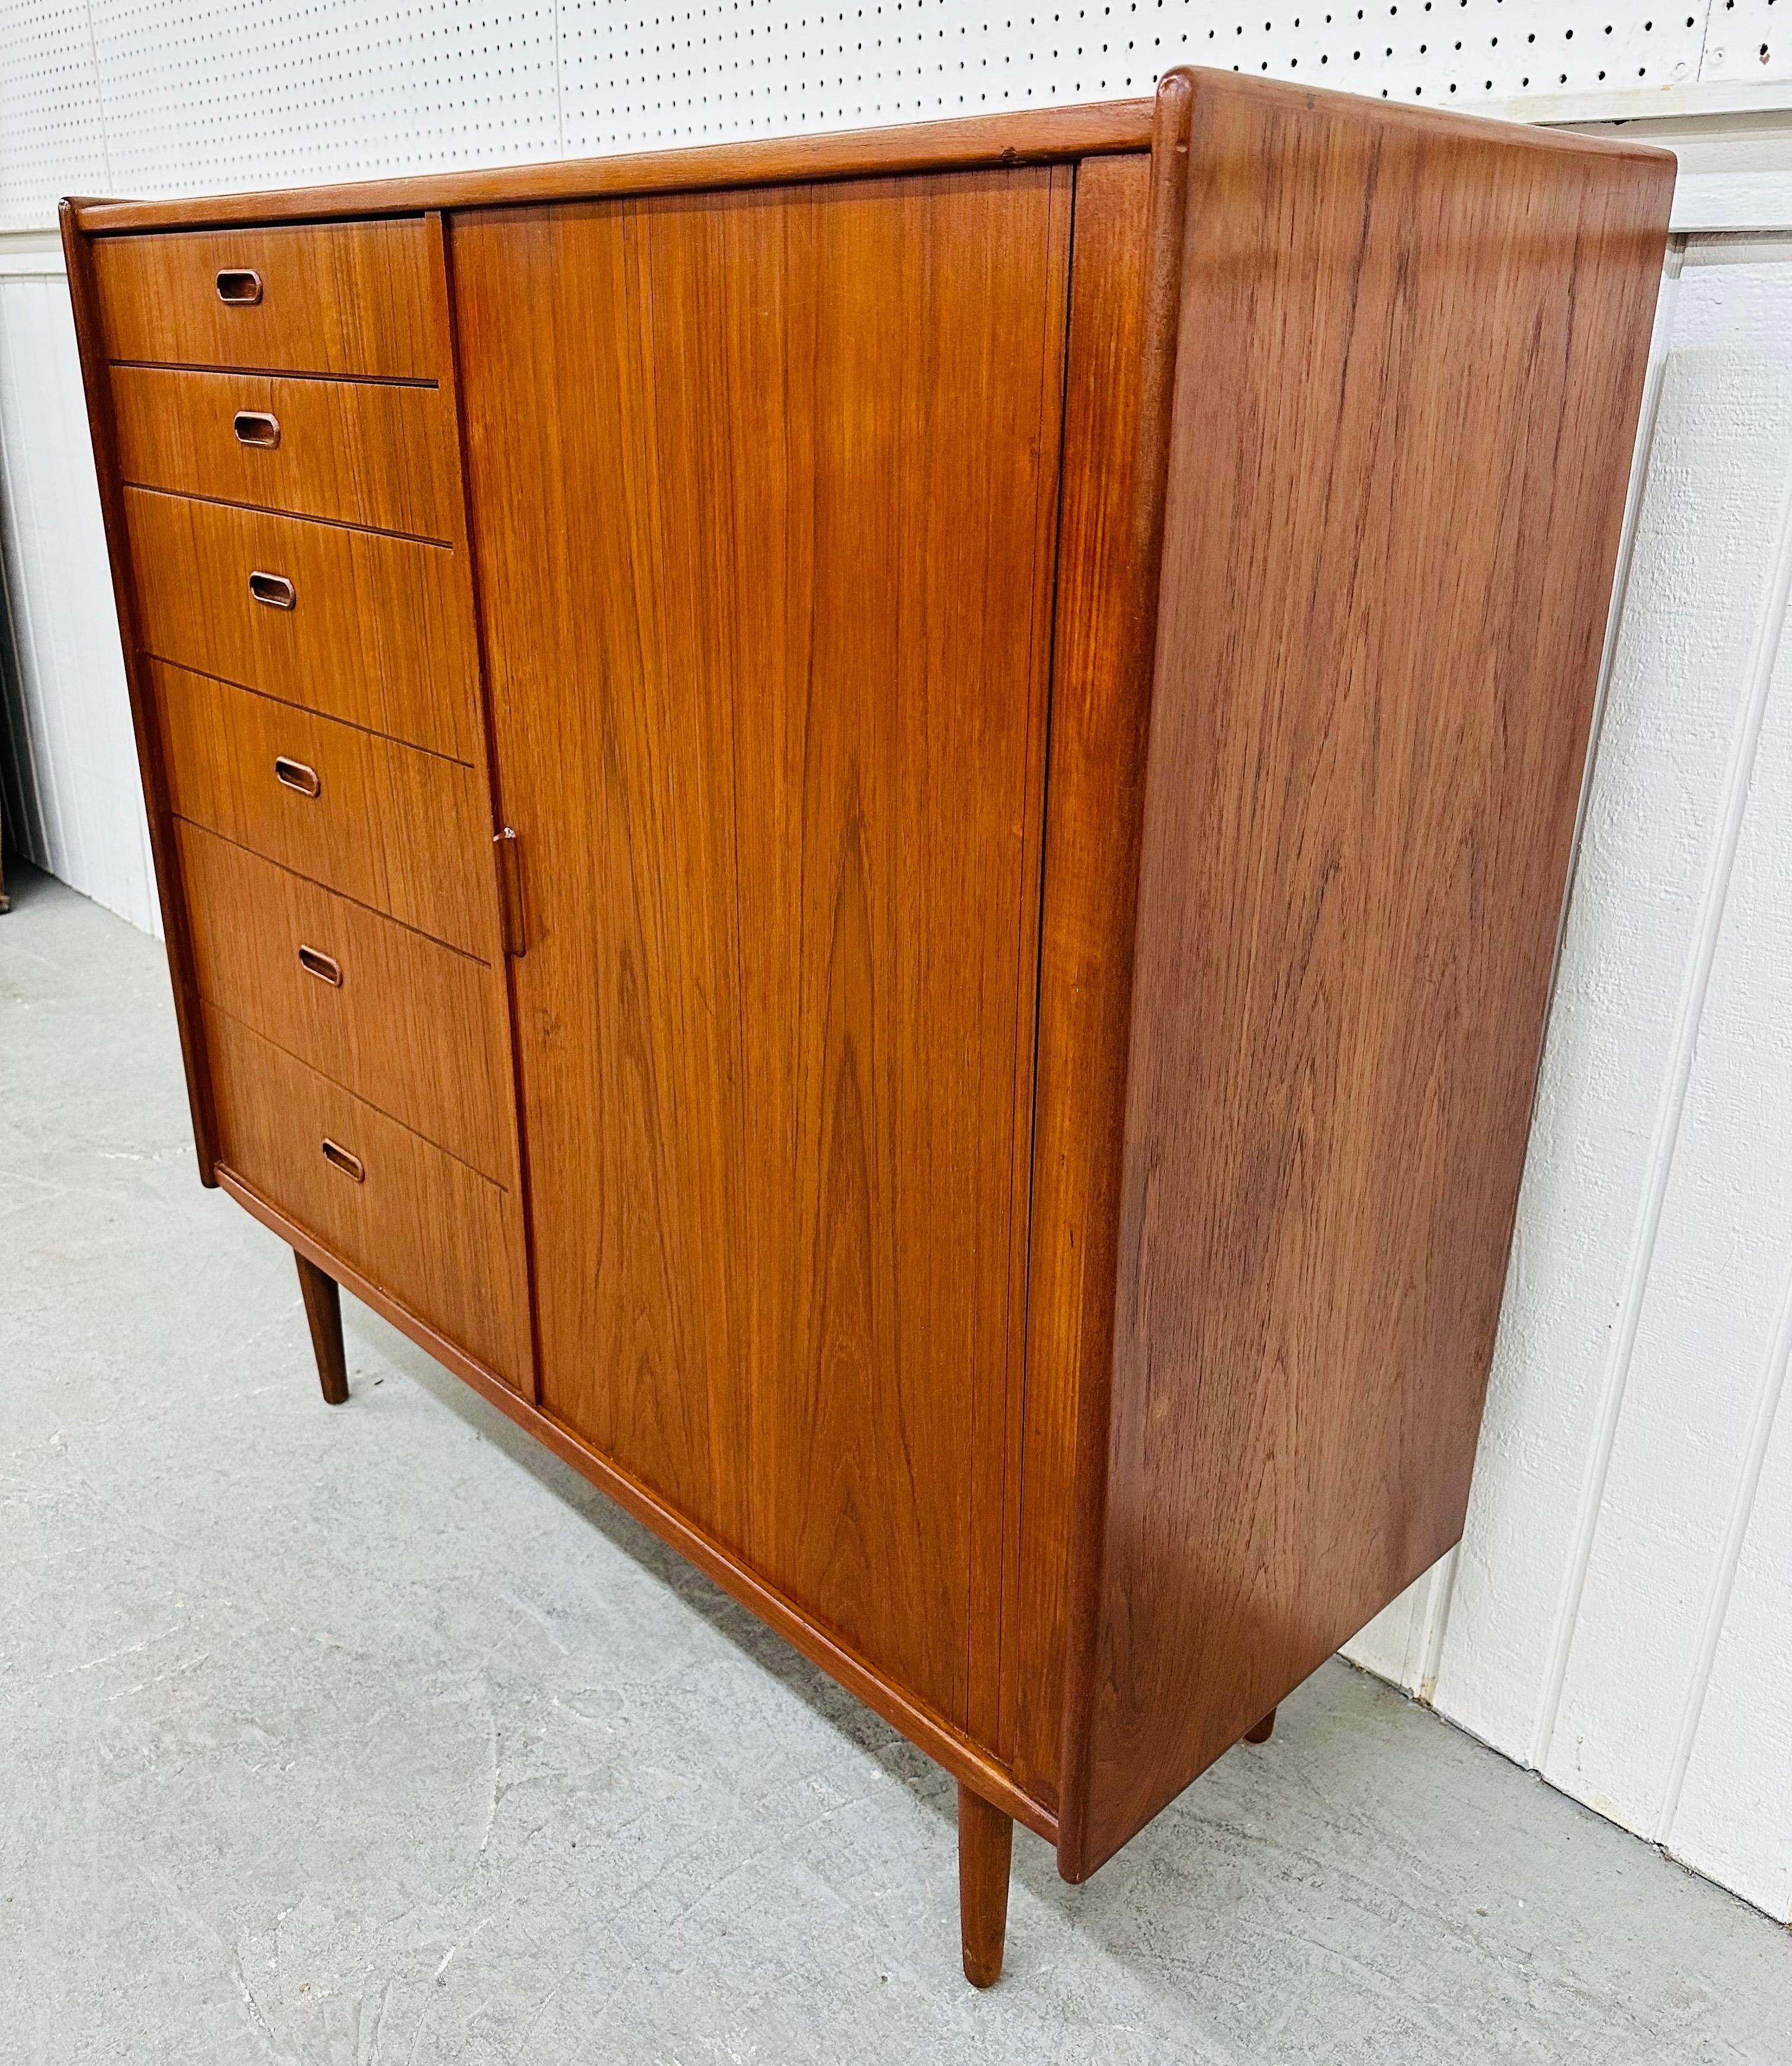 This listing is for a Mid-Century Danish Modern Falster Teak Tambour High Chest. Featuring a straight line design, six graduated drawers on the left side, recessed wooden pulls, tambour sliding door on the right that opens up to six hidden drawers,